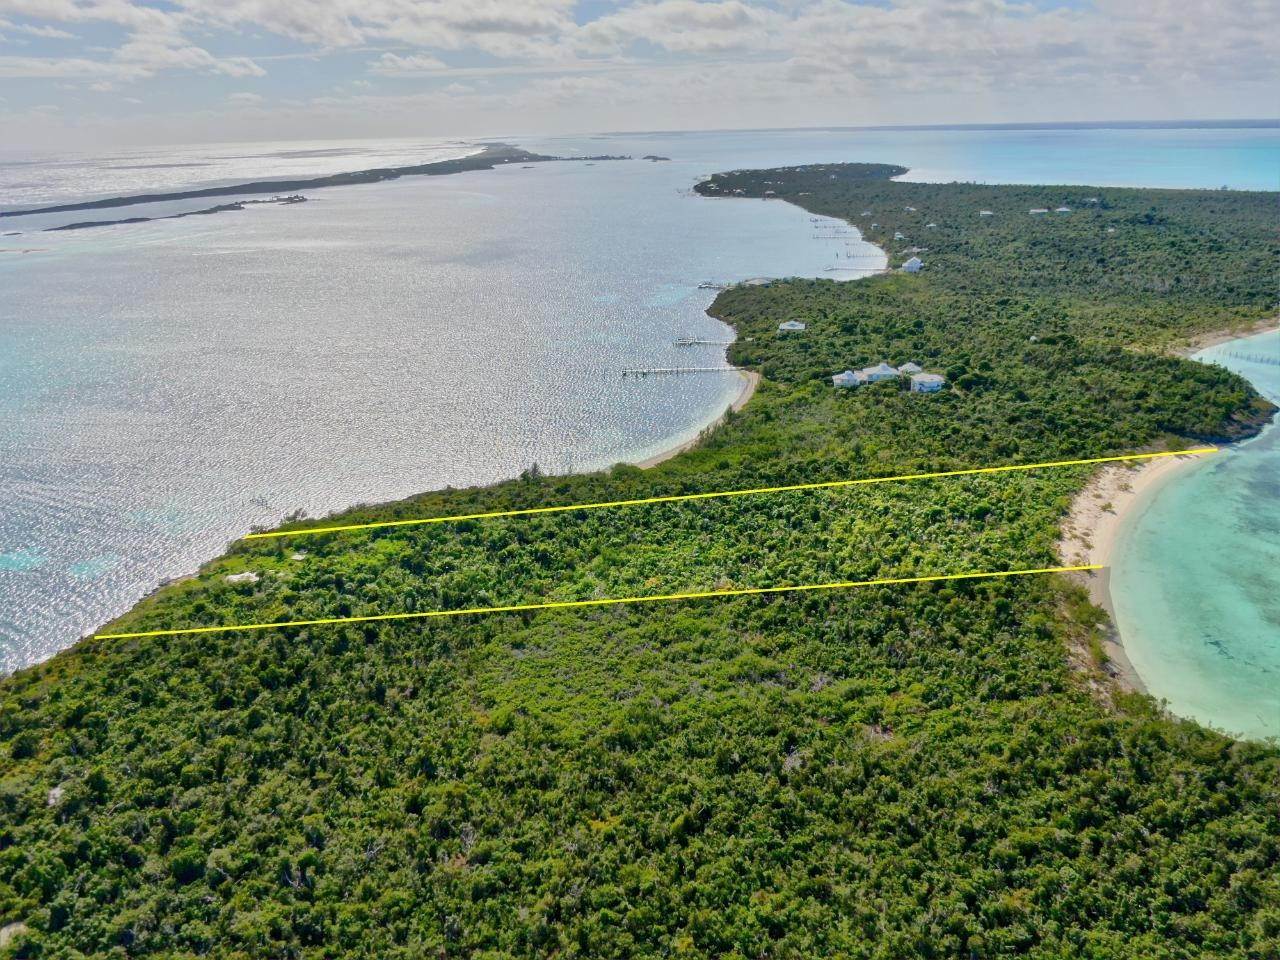 17. Lots / Acreage for Sale at Lubbers Quarters, Abaco, Bahamas